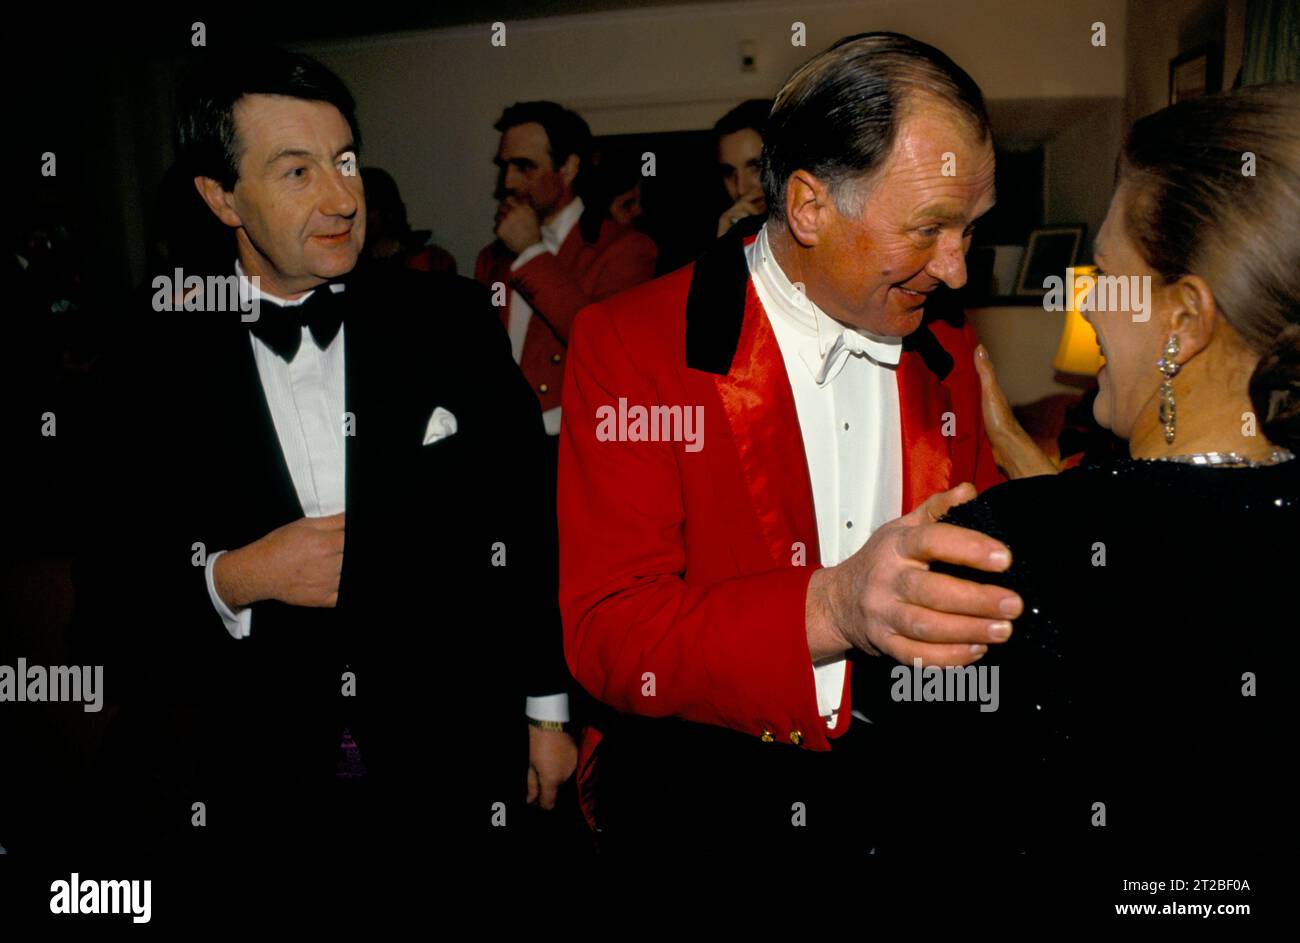 Master of the Foxhounds in traditional Hunting pink chatting up a woman at the Hunt Ball at Tysoe Manor, celebrates the end of the hunting season. Tysoe, Warwickshire, England April 1982. 1980s UK HOMER SYKES. Stock Photo